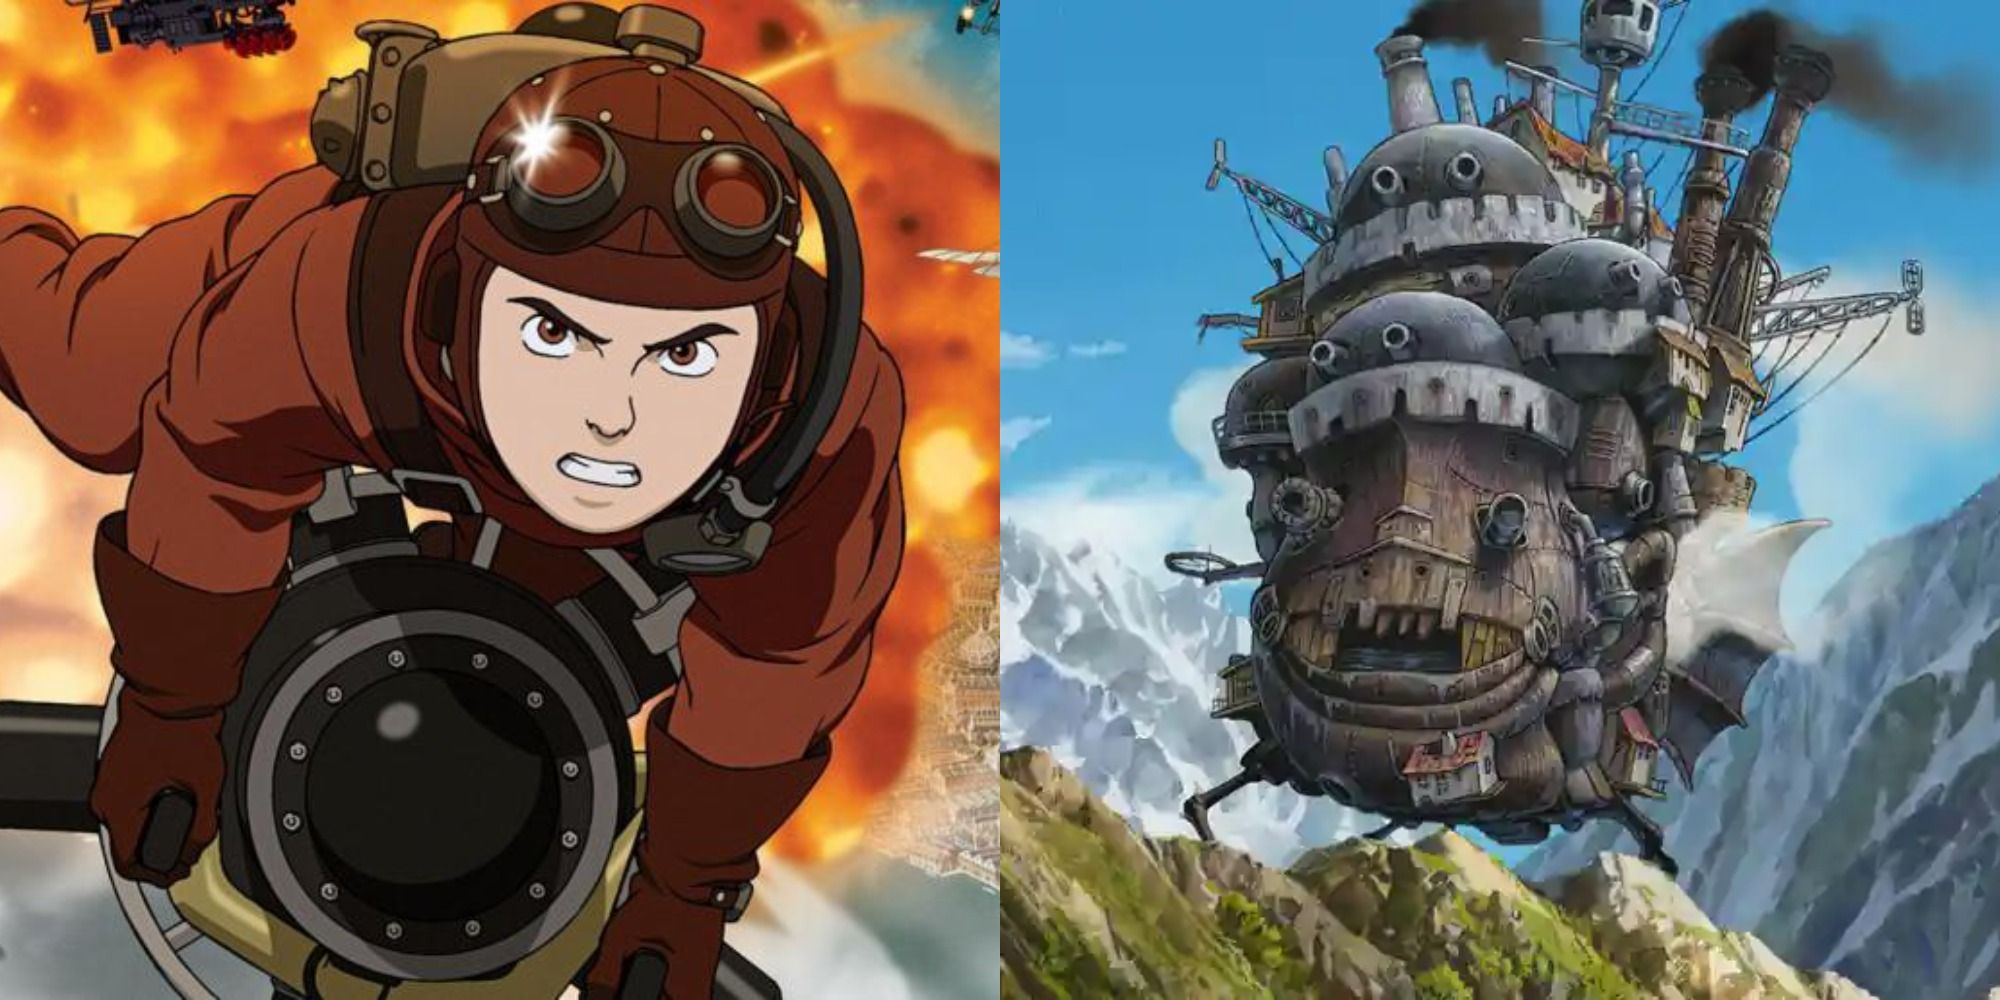 Split image showing Steam in Steamboy and the castle from Howl's Moving Castle.